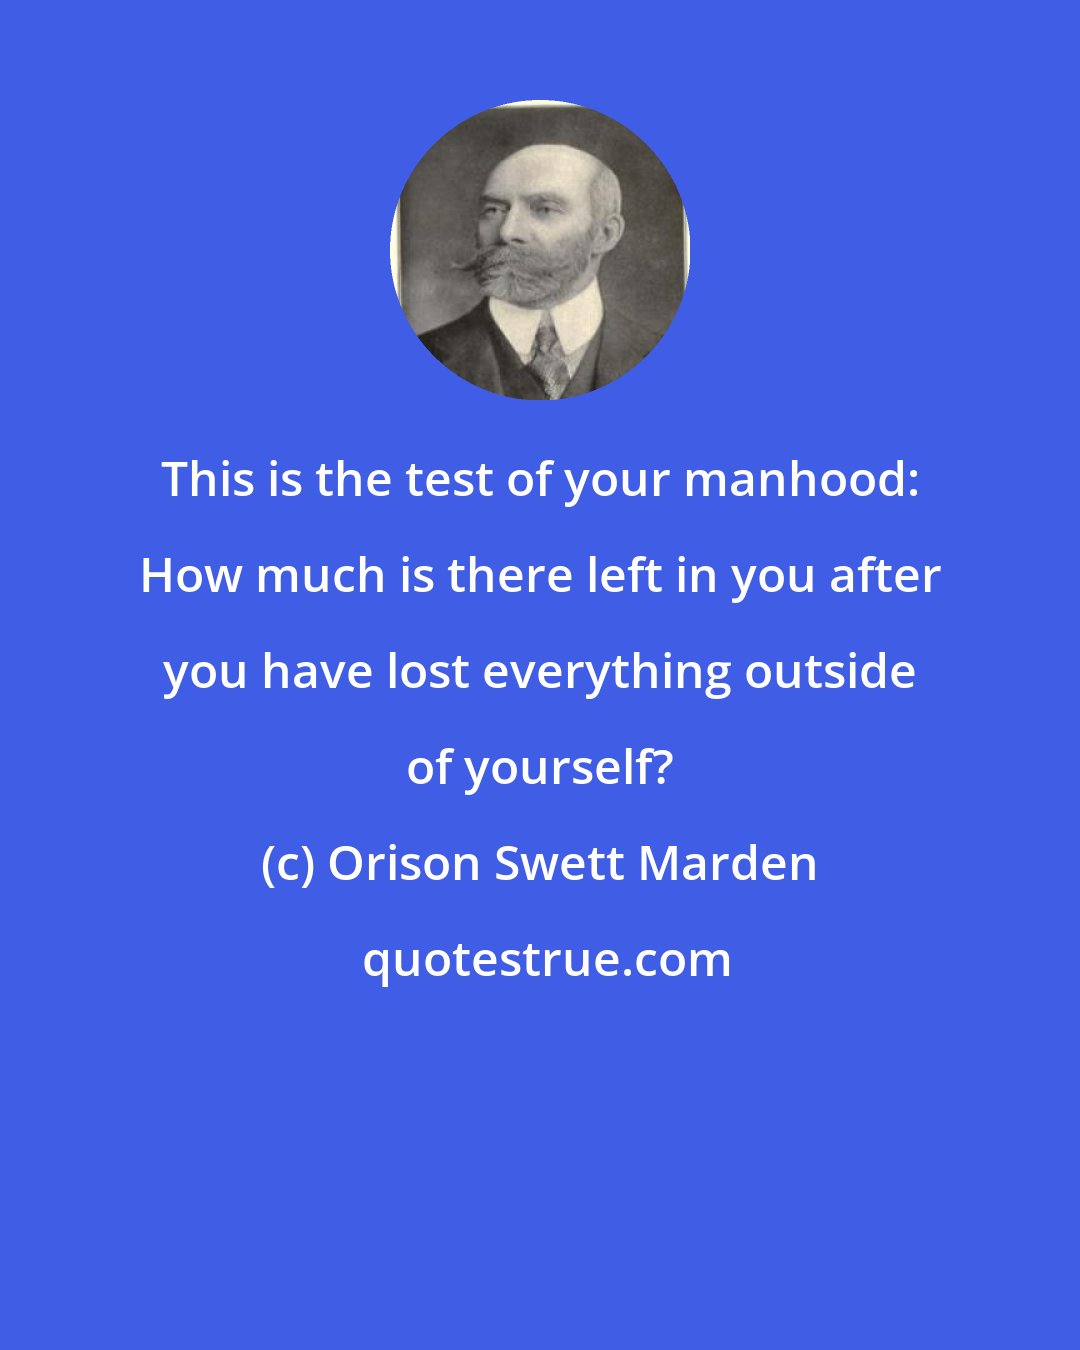 Orison Swett Marden: This is the test of your manhood: How much is there left in you after you have lost everything outside of yourself?